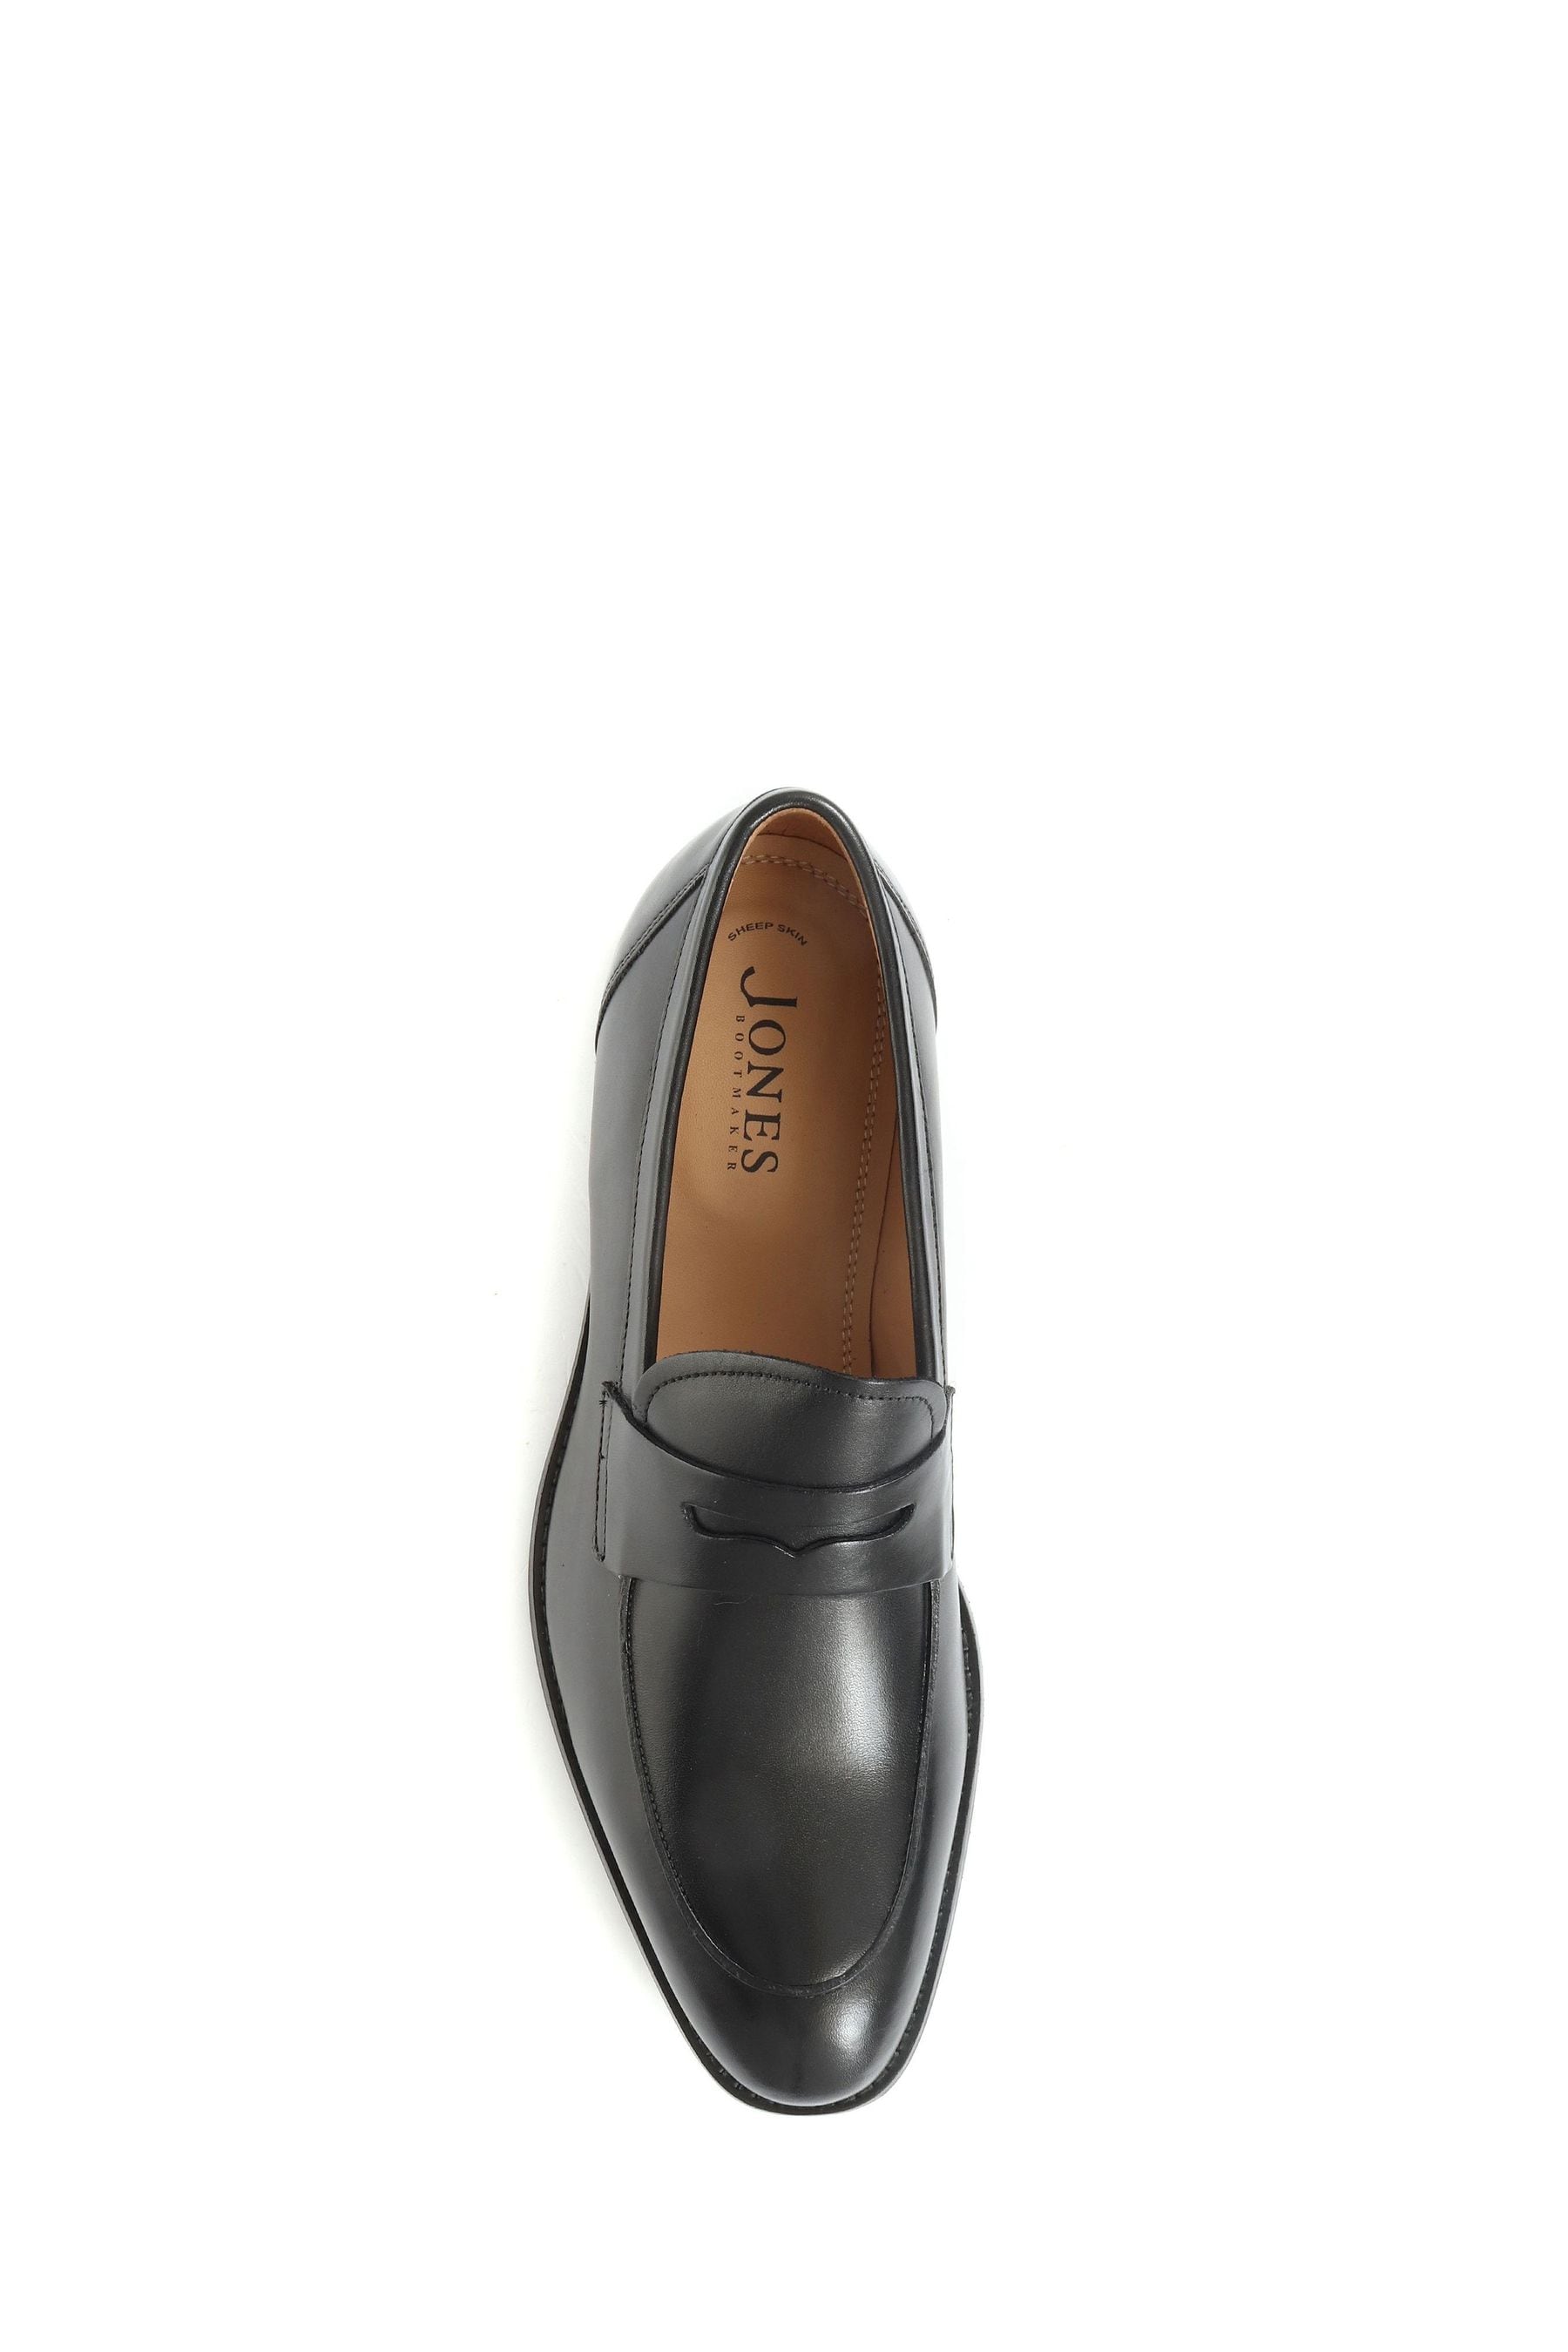 Buy Jones Bootmaker Leather Penny Loafers from the Next UK online shop